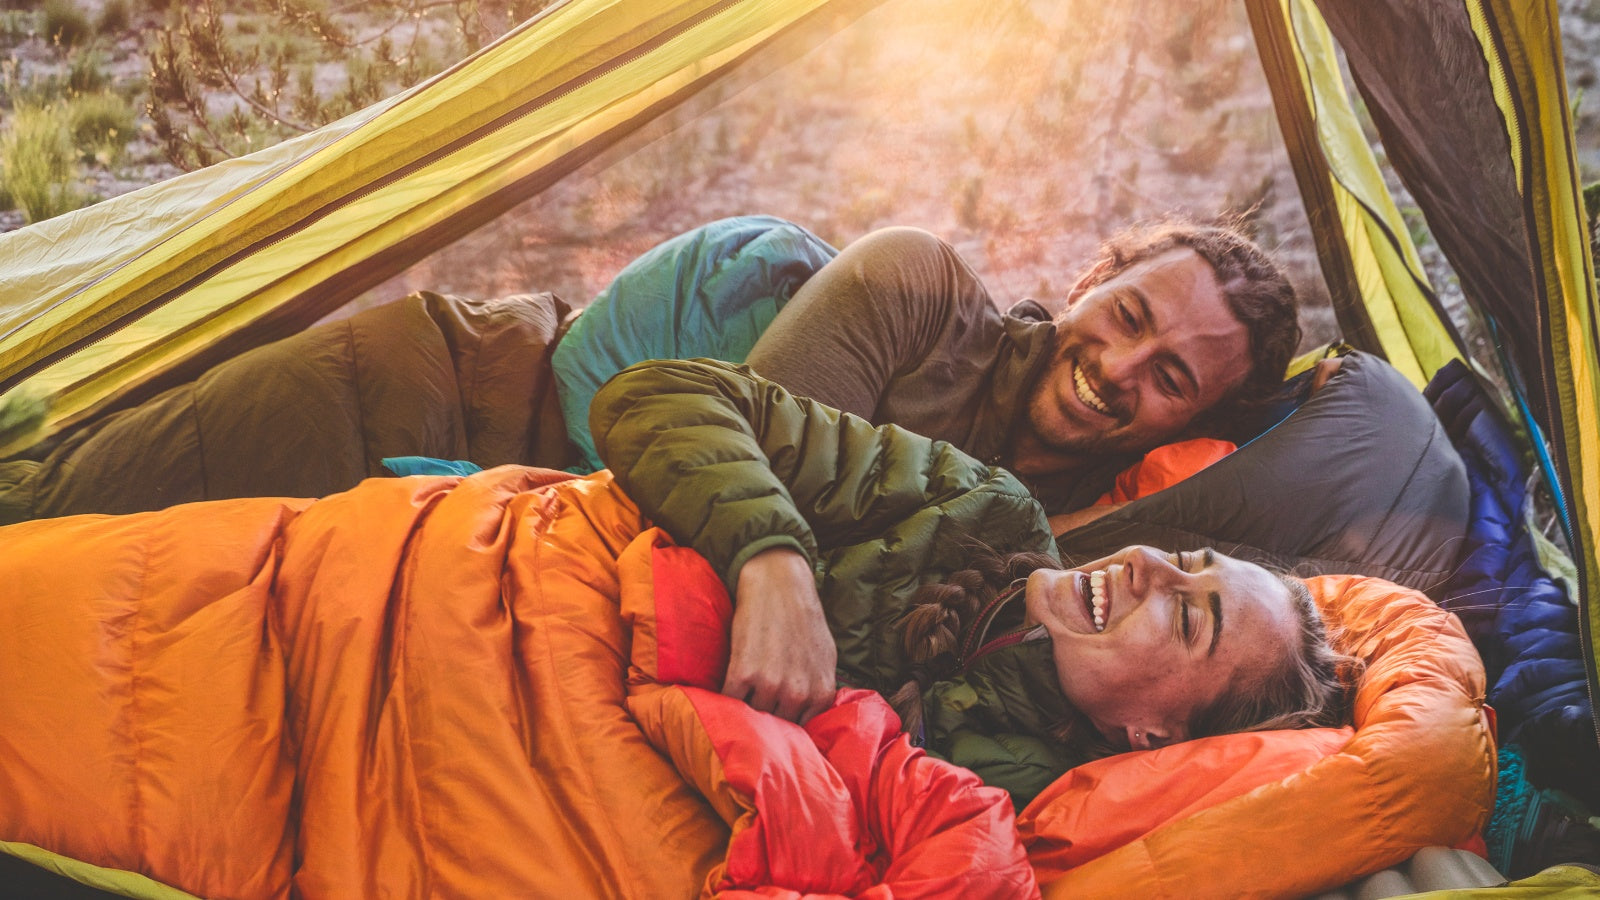 Whether you like to sleep on your back, side, or stomach, whether you toss and turn or sleep like a rock, we believe a sleeping bag should conform to your sleeping habits rather than you having to conform to its limitations. 